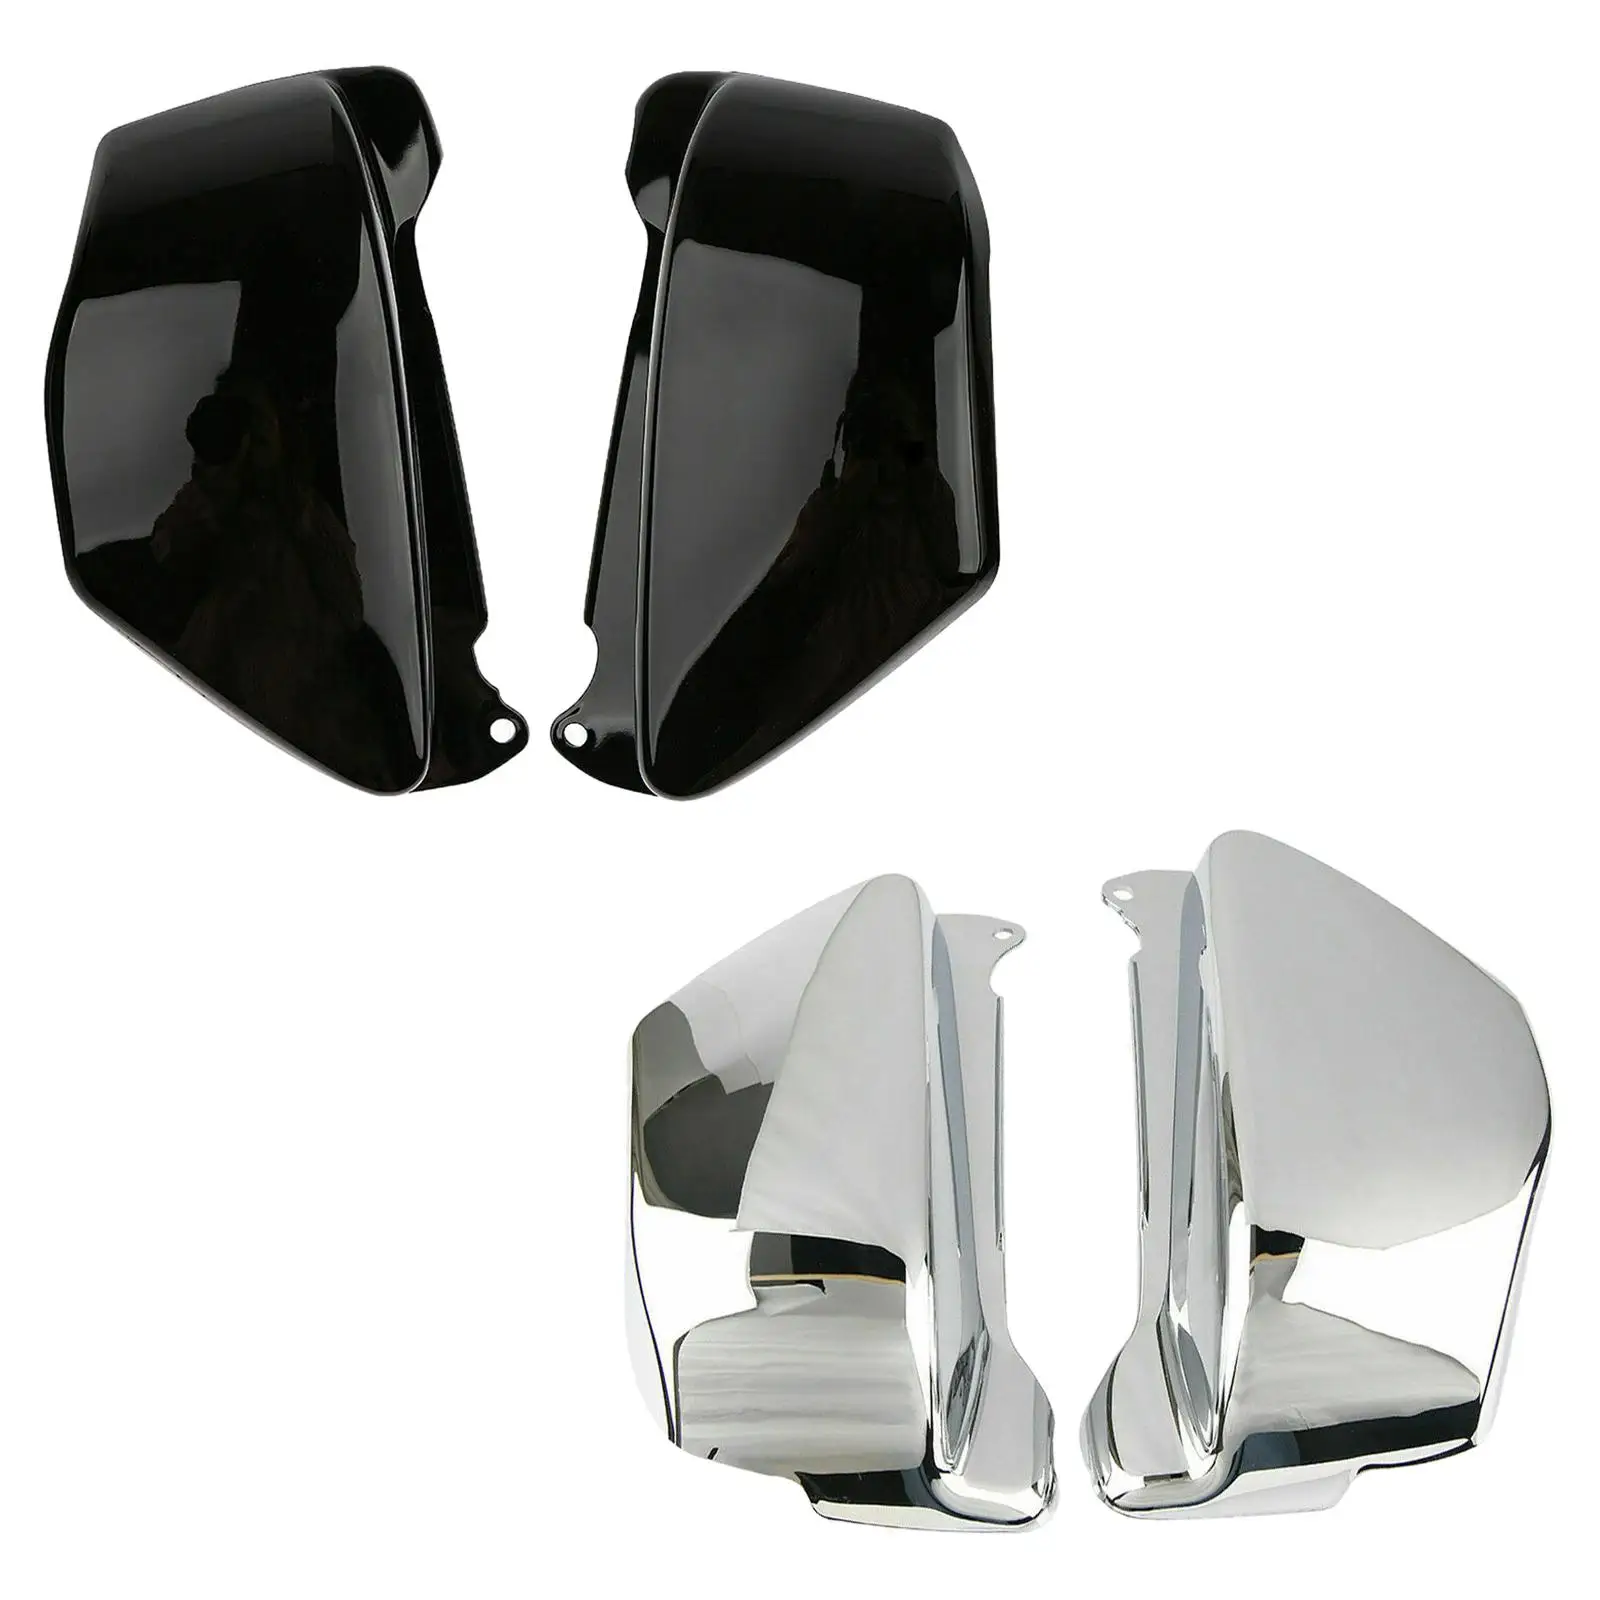 

2Pcs Motorcycle Chrome Battery Side Fairing Cover Protector Fit for Honda Vf750